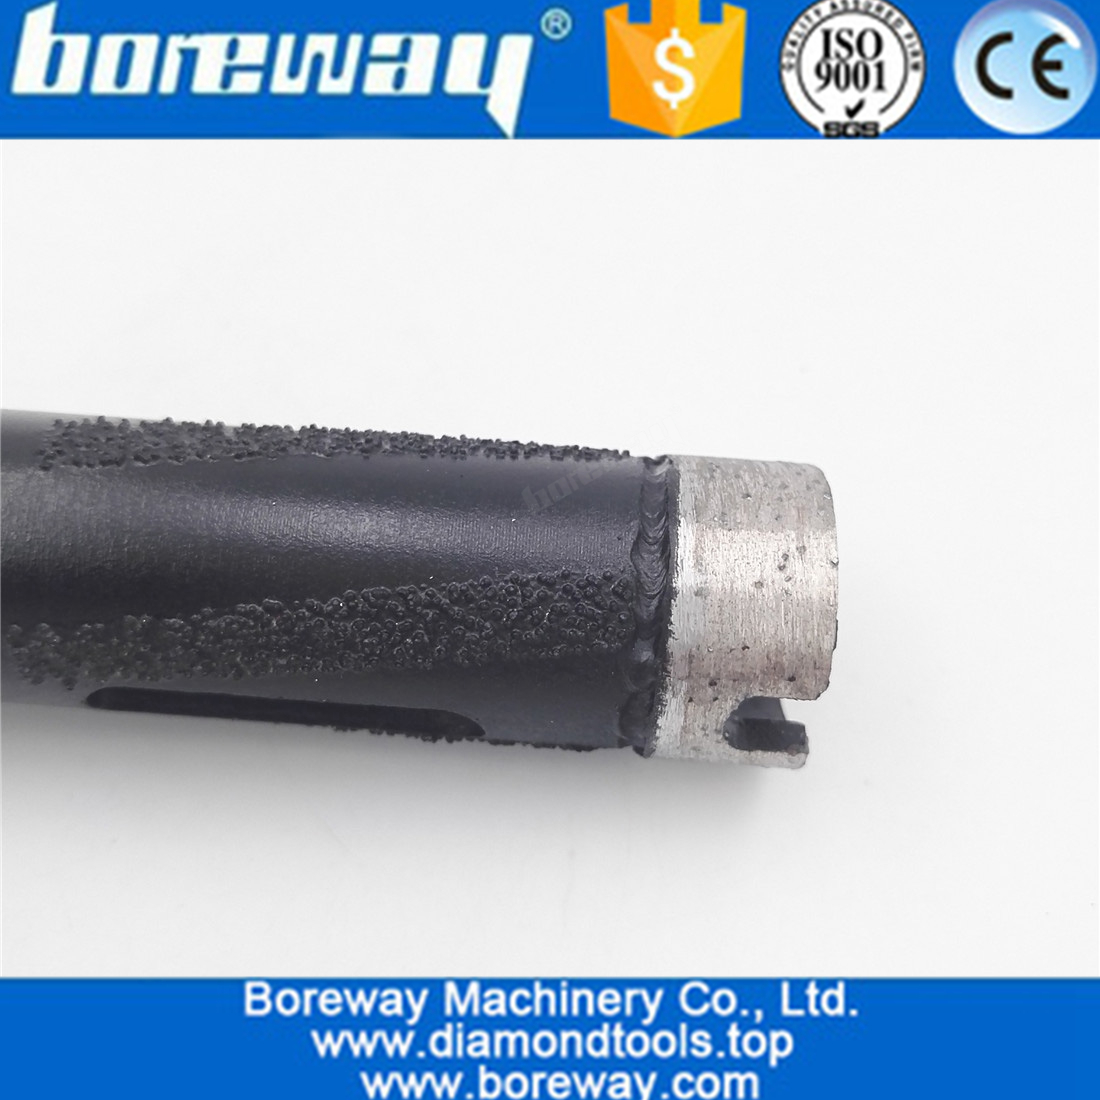 Laser Welded Diamond Core Drill Bit Diameter 20mm Dry drilling with side protection with M14 Thread 06